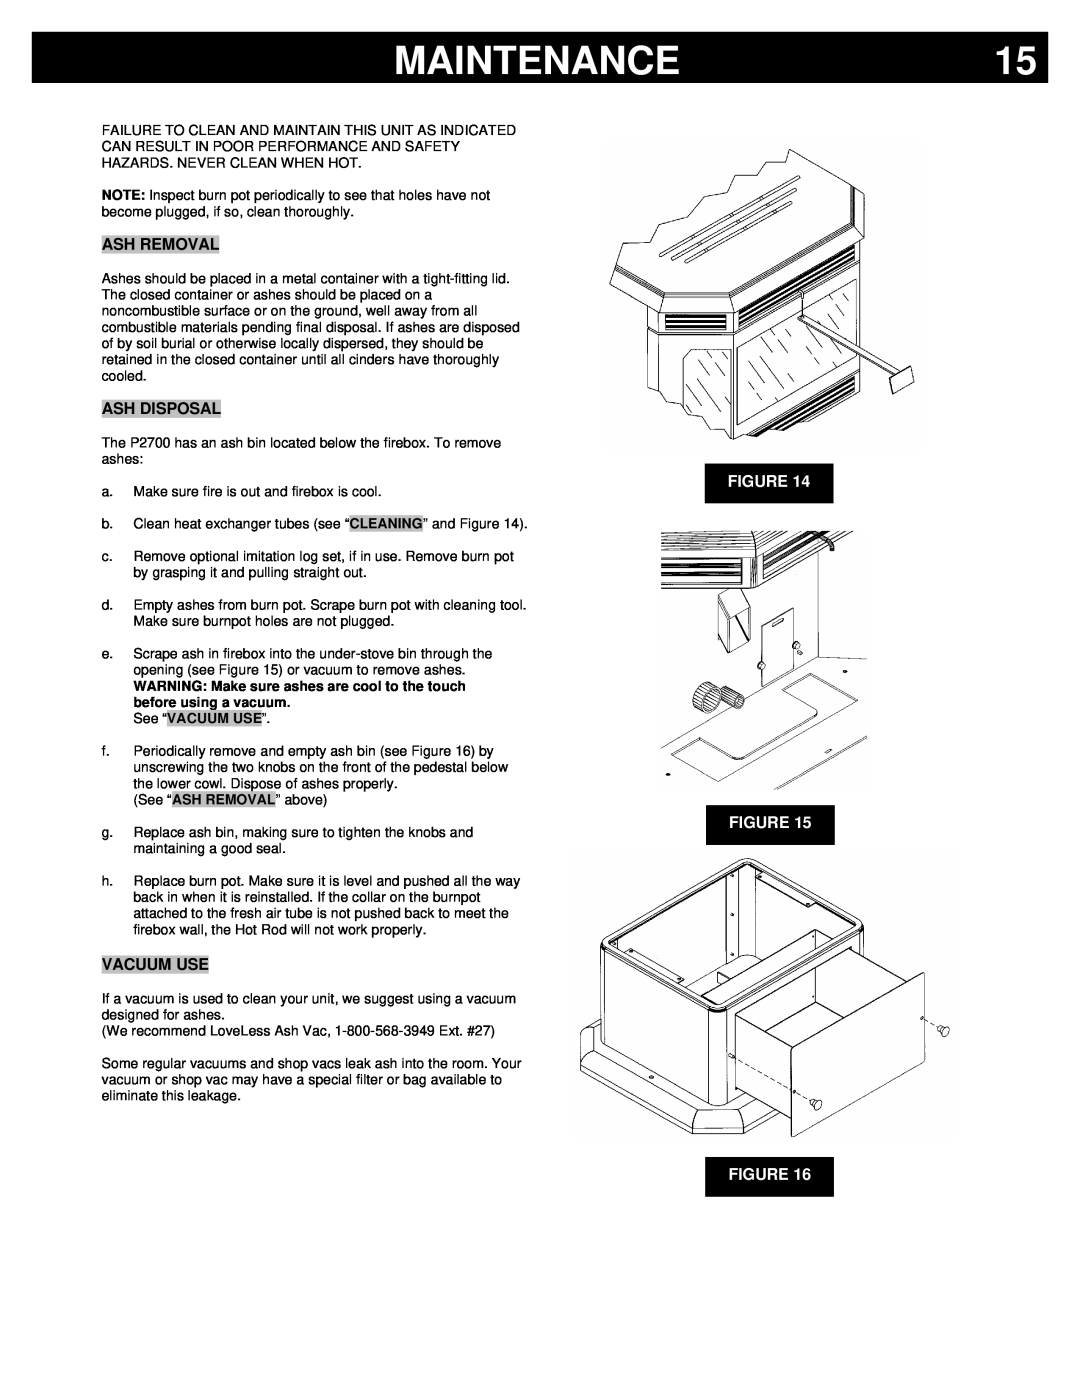 Breckwell P2700 owner manual Maintenance, Figure Figure, Ash Removal, Ash Disposal, Vacuum Use, See “VACUUM USE” 